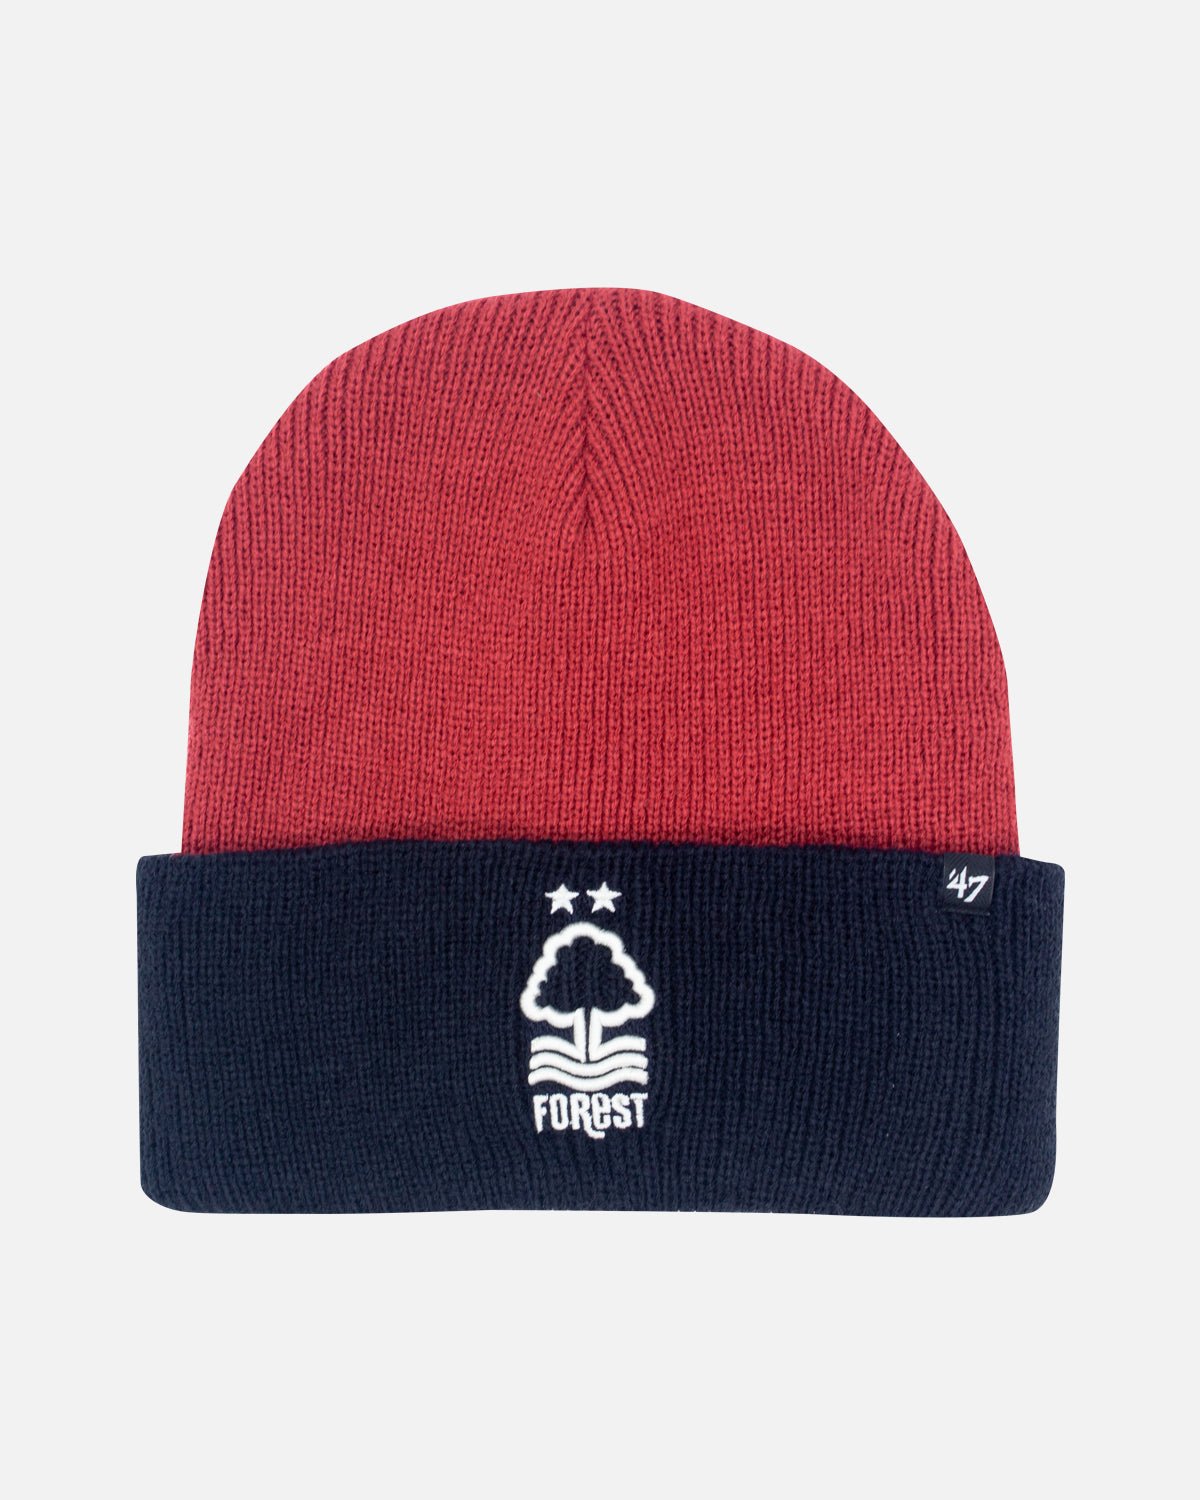 NFFC Red/Navy '47 Campus Cuff Knit - Nottingham Forest FC